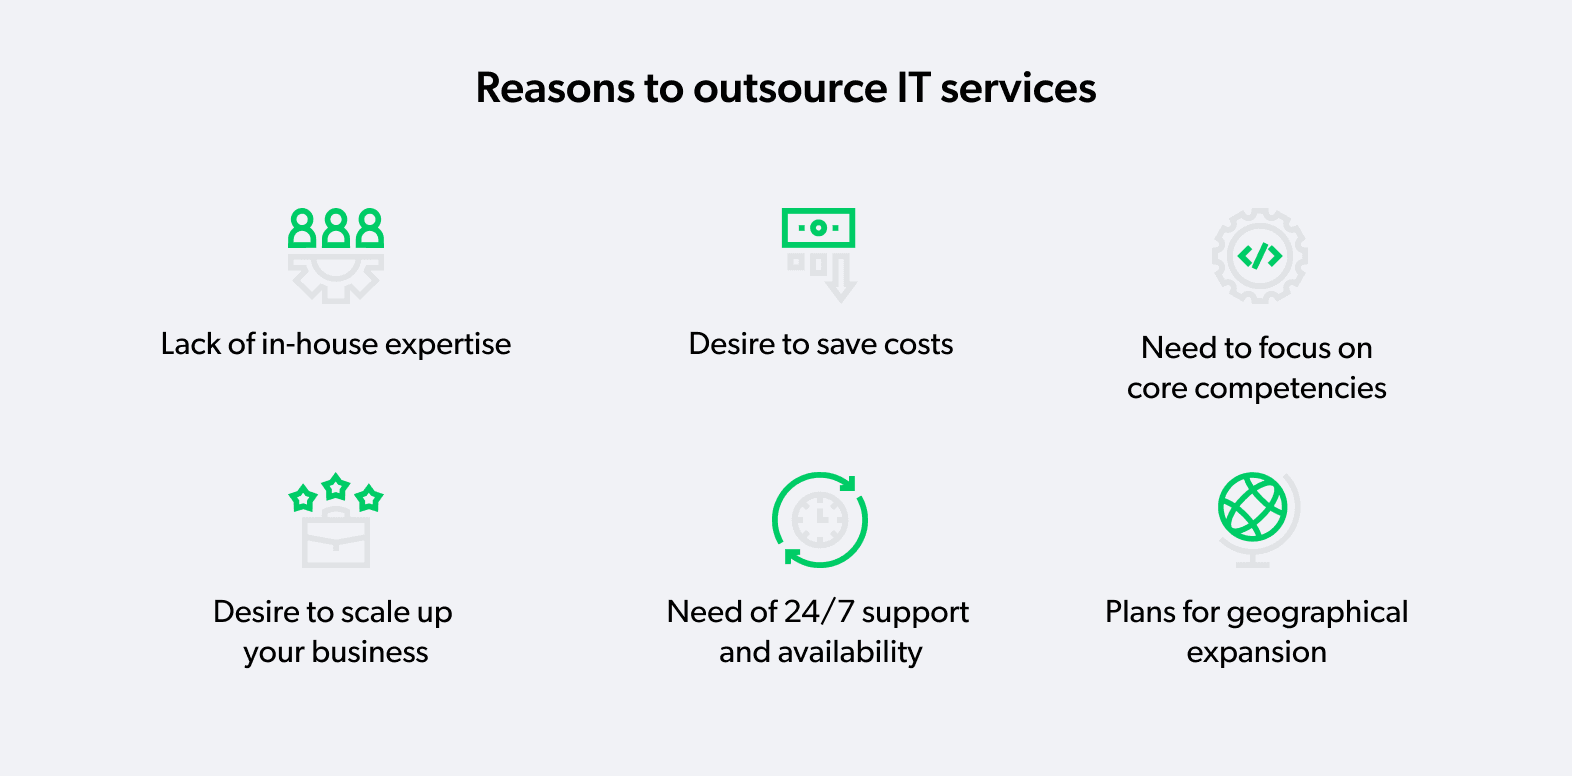 Reasons to outsource IT services